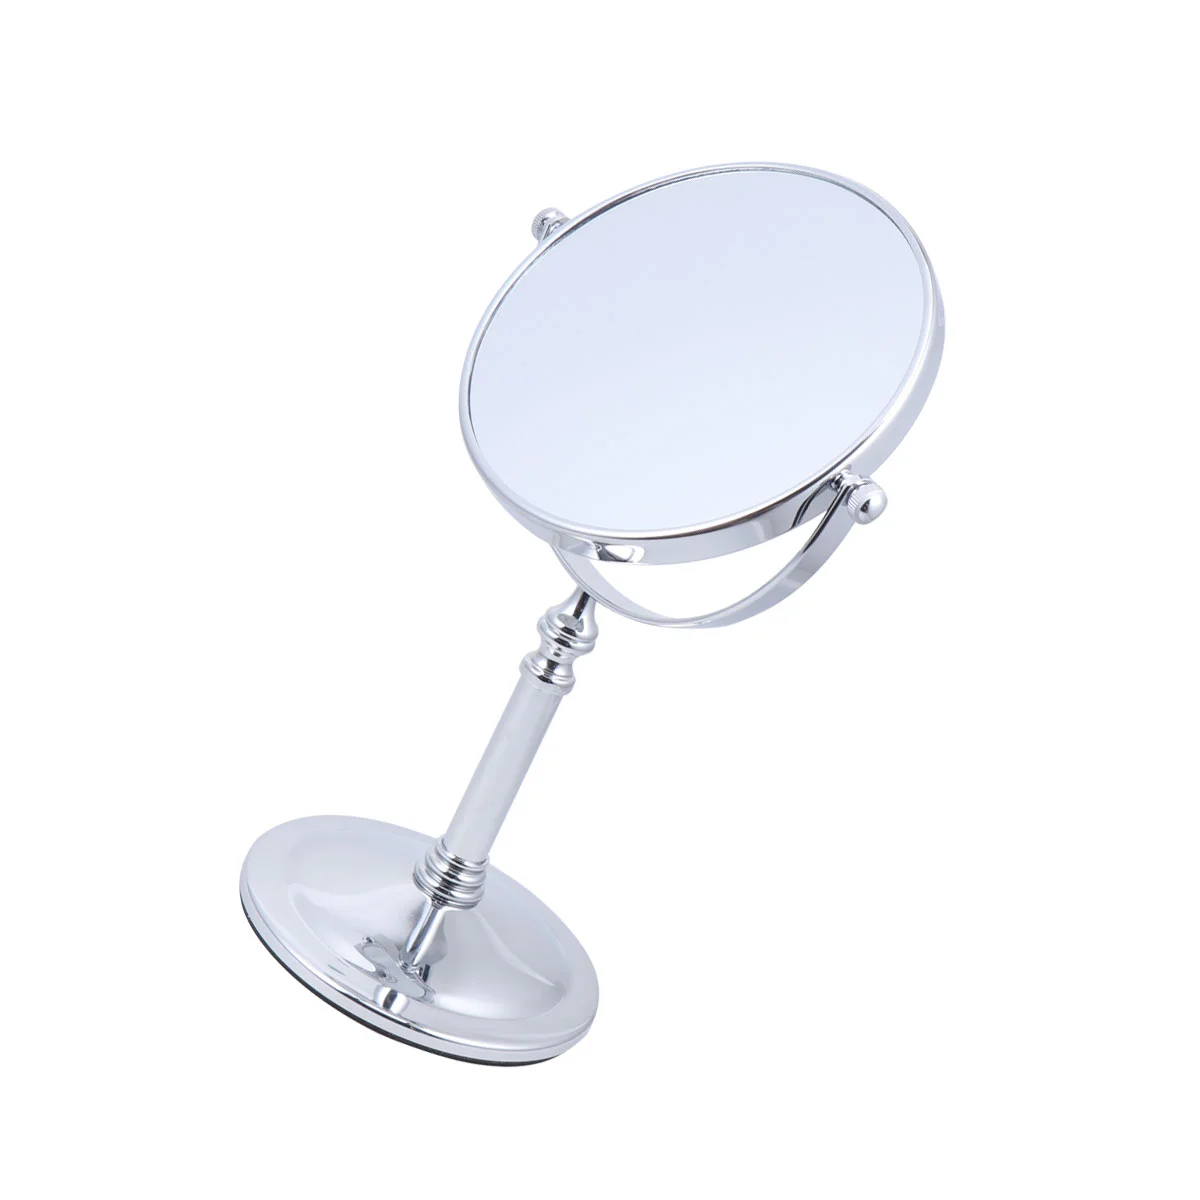 

Mirror Vanity Magnifying Side Golden Table Double Magnification 3X Stand Swivel Home Two Bathroom Shaving Beauty Vintage